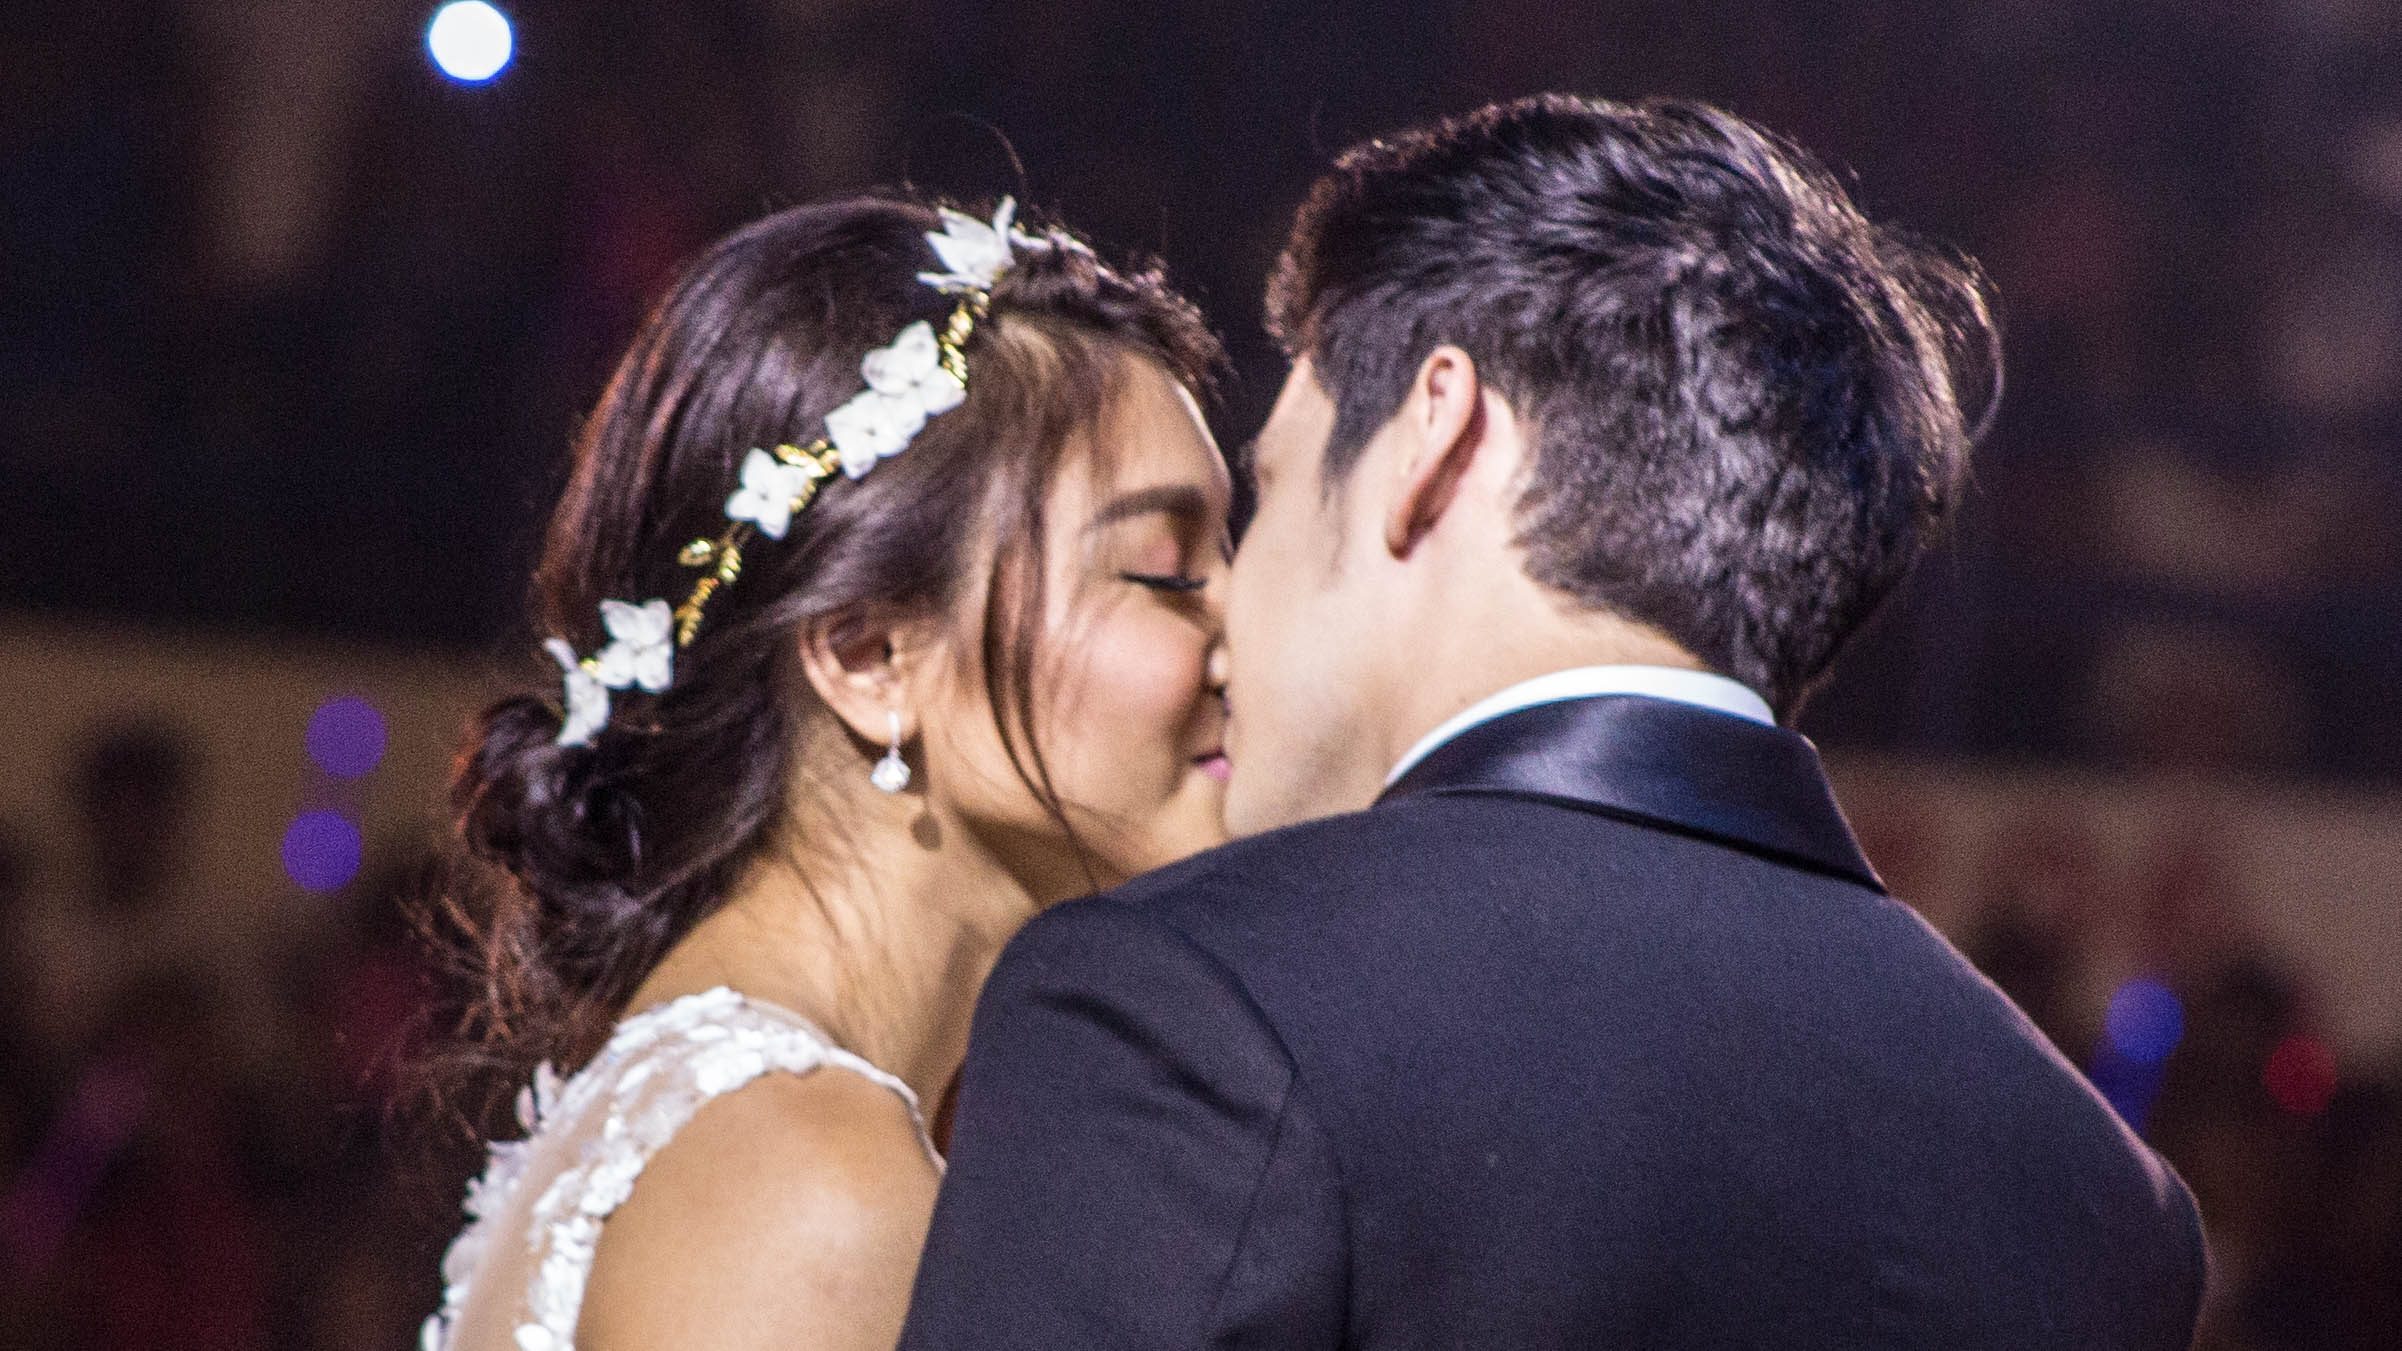 SEALED WITH A KISS. James Reid and Nadine Lustre share a smooch at the live viewing party of the finale of their show 'On The Wings of Love' in 2016. File photo by Paolo Abad/Rappler 